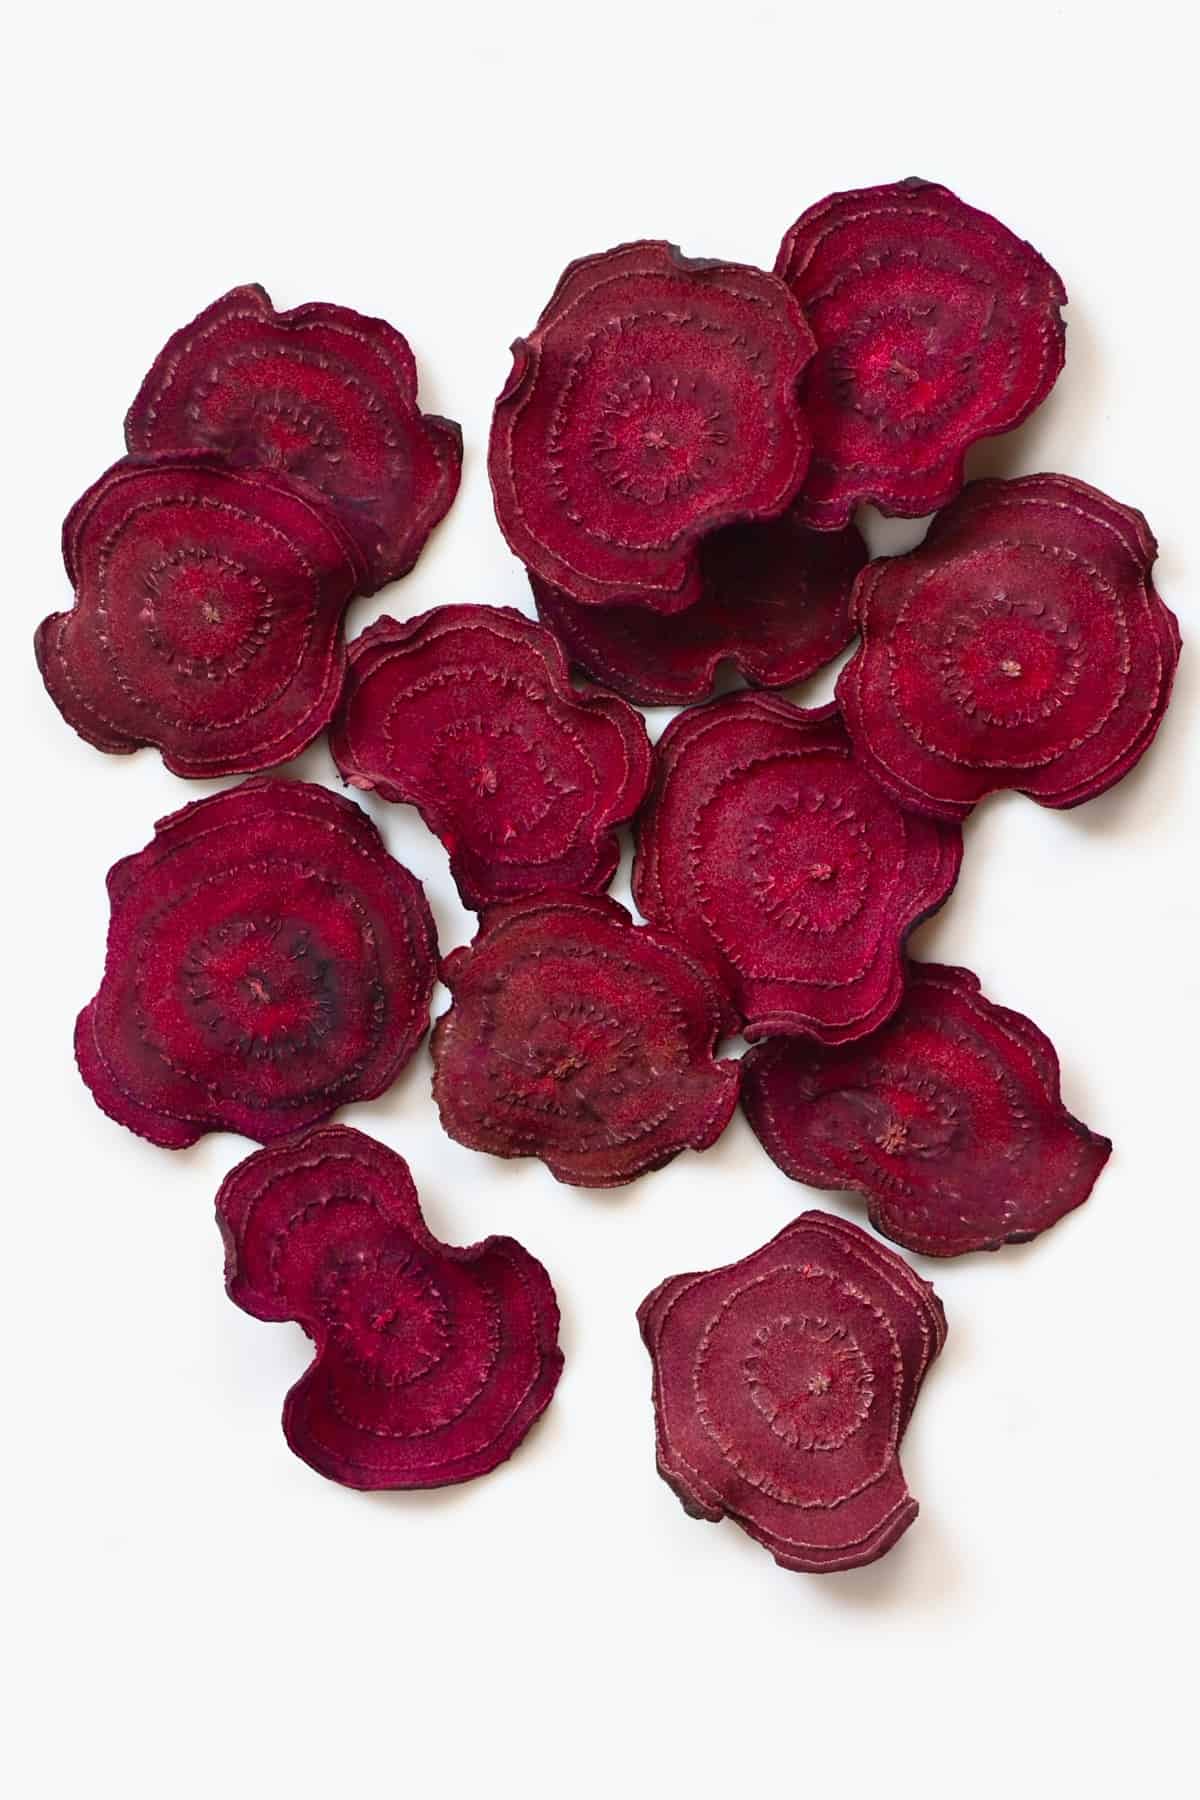 How to Make Beetroot Chips (Baked or Alphafoodie